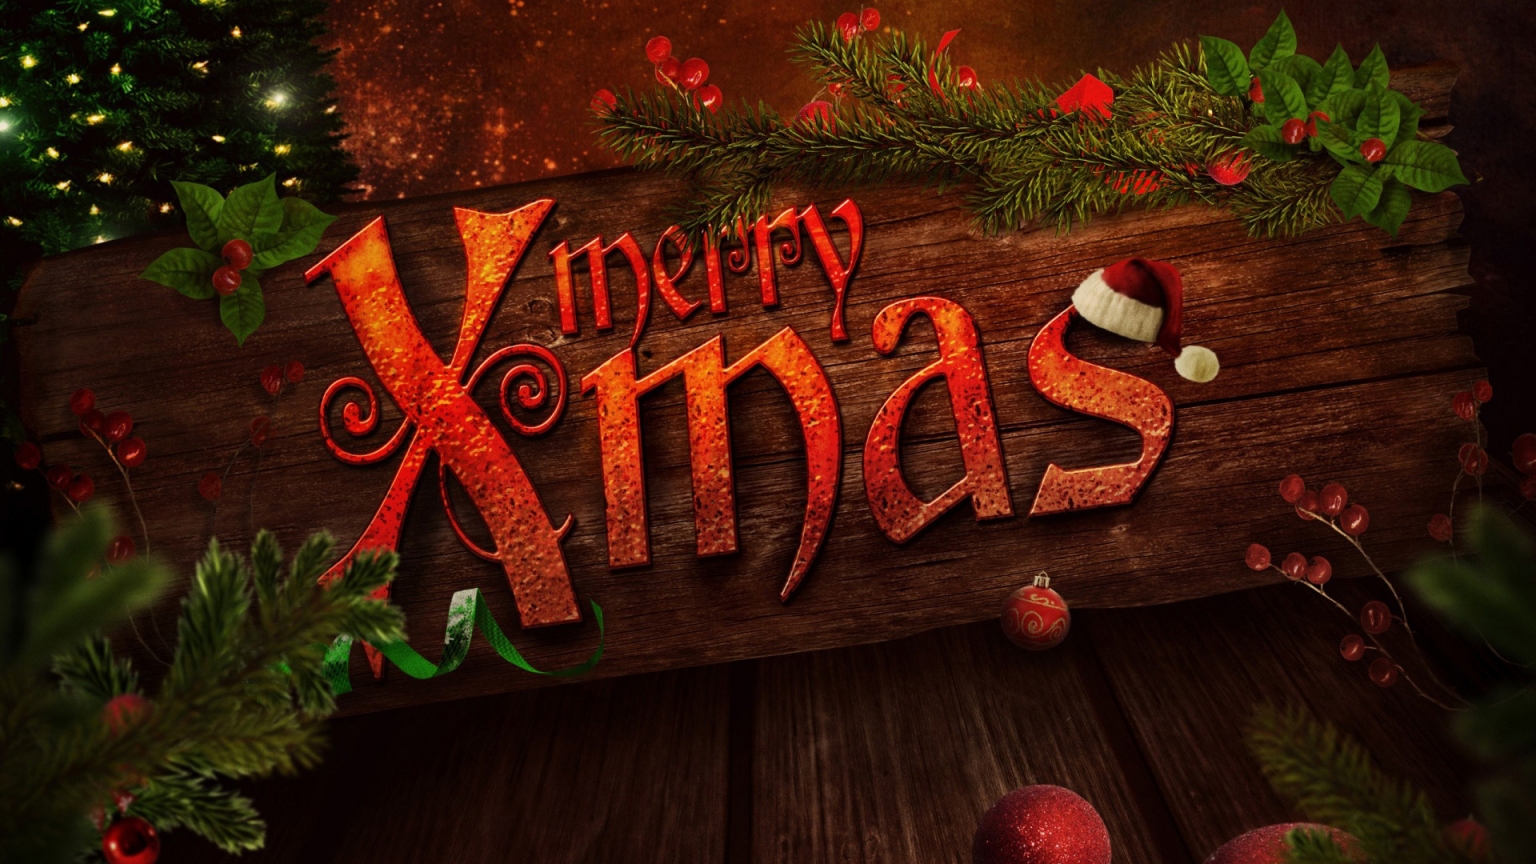 Merry Xmas for 1536 x 864 HDTV resolution